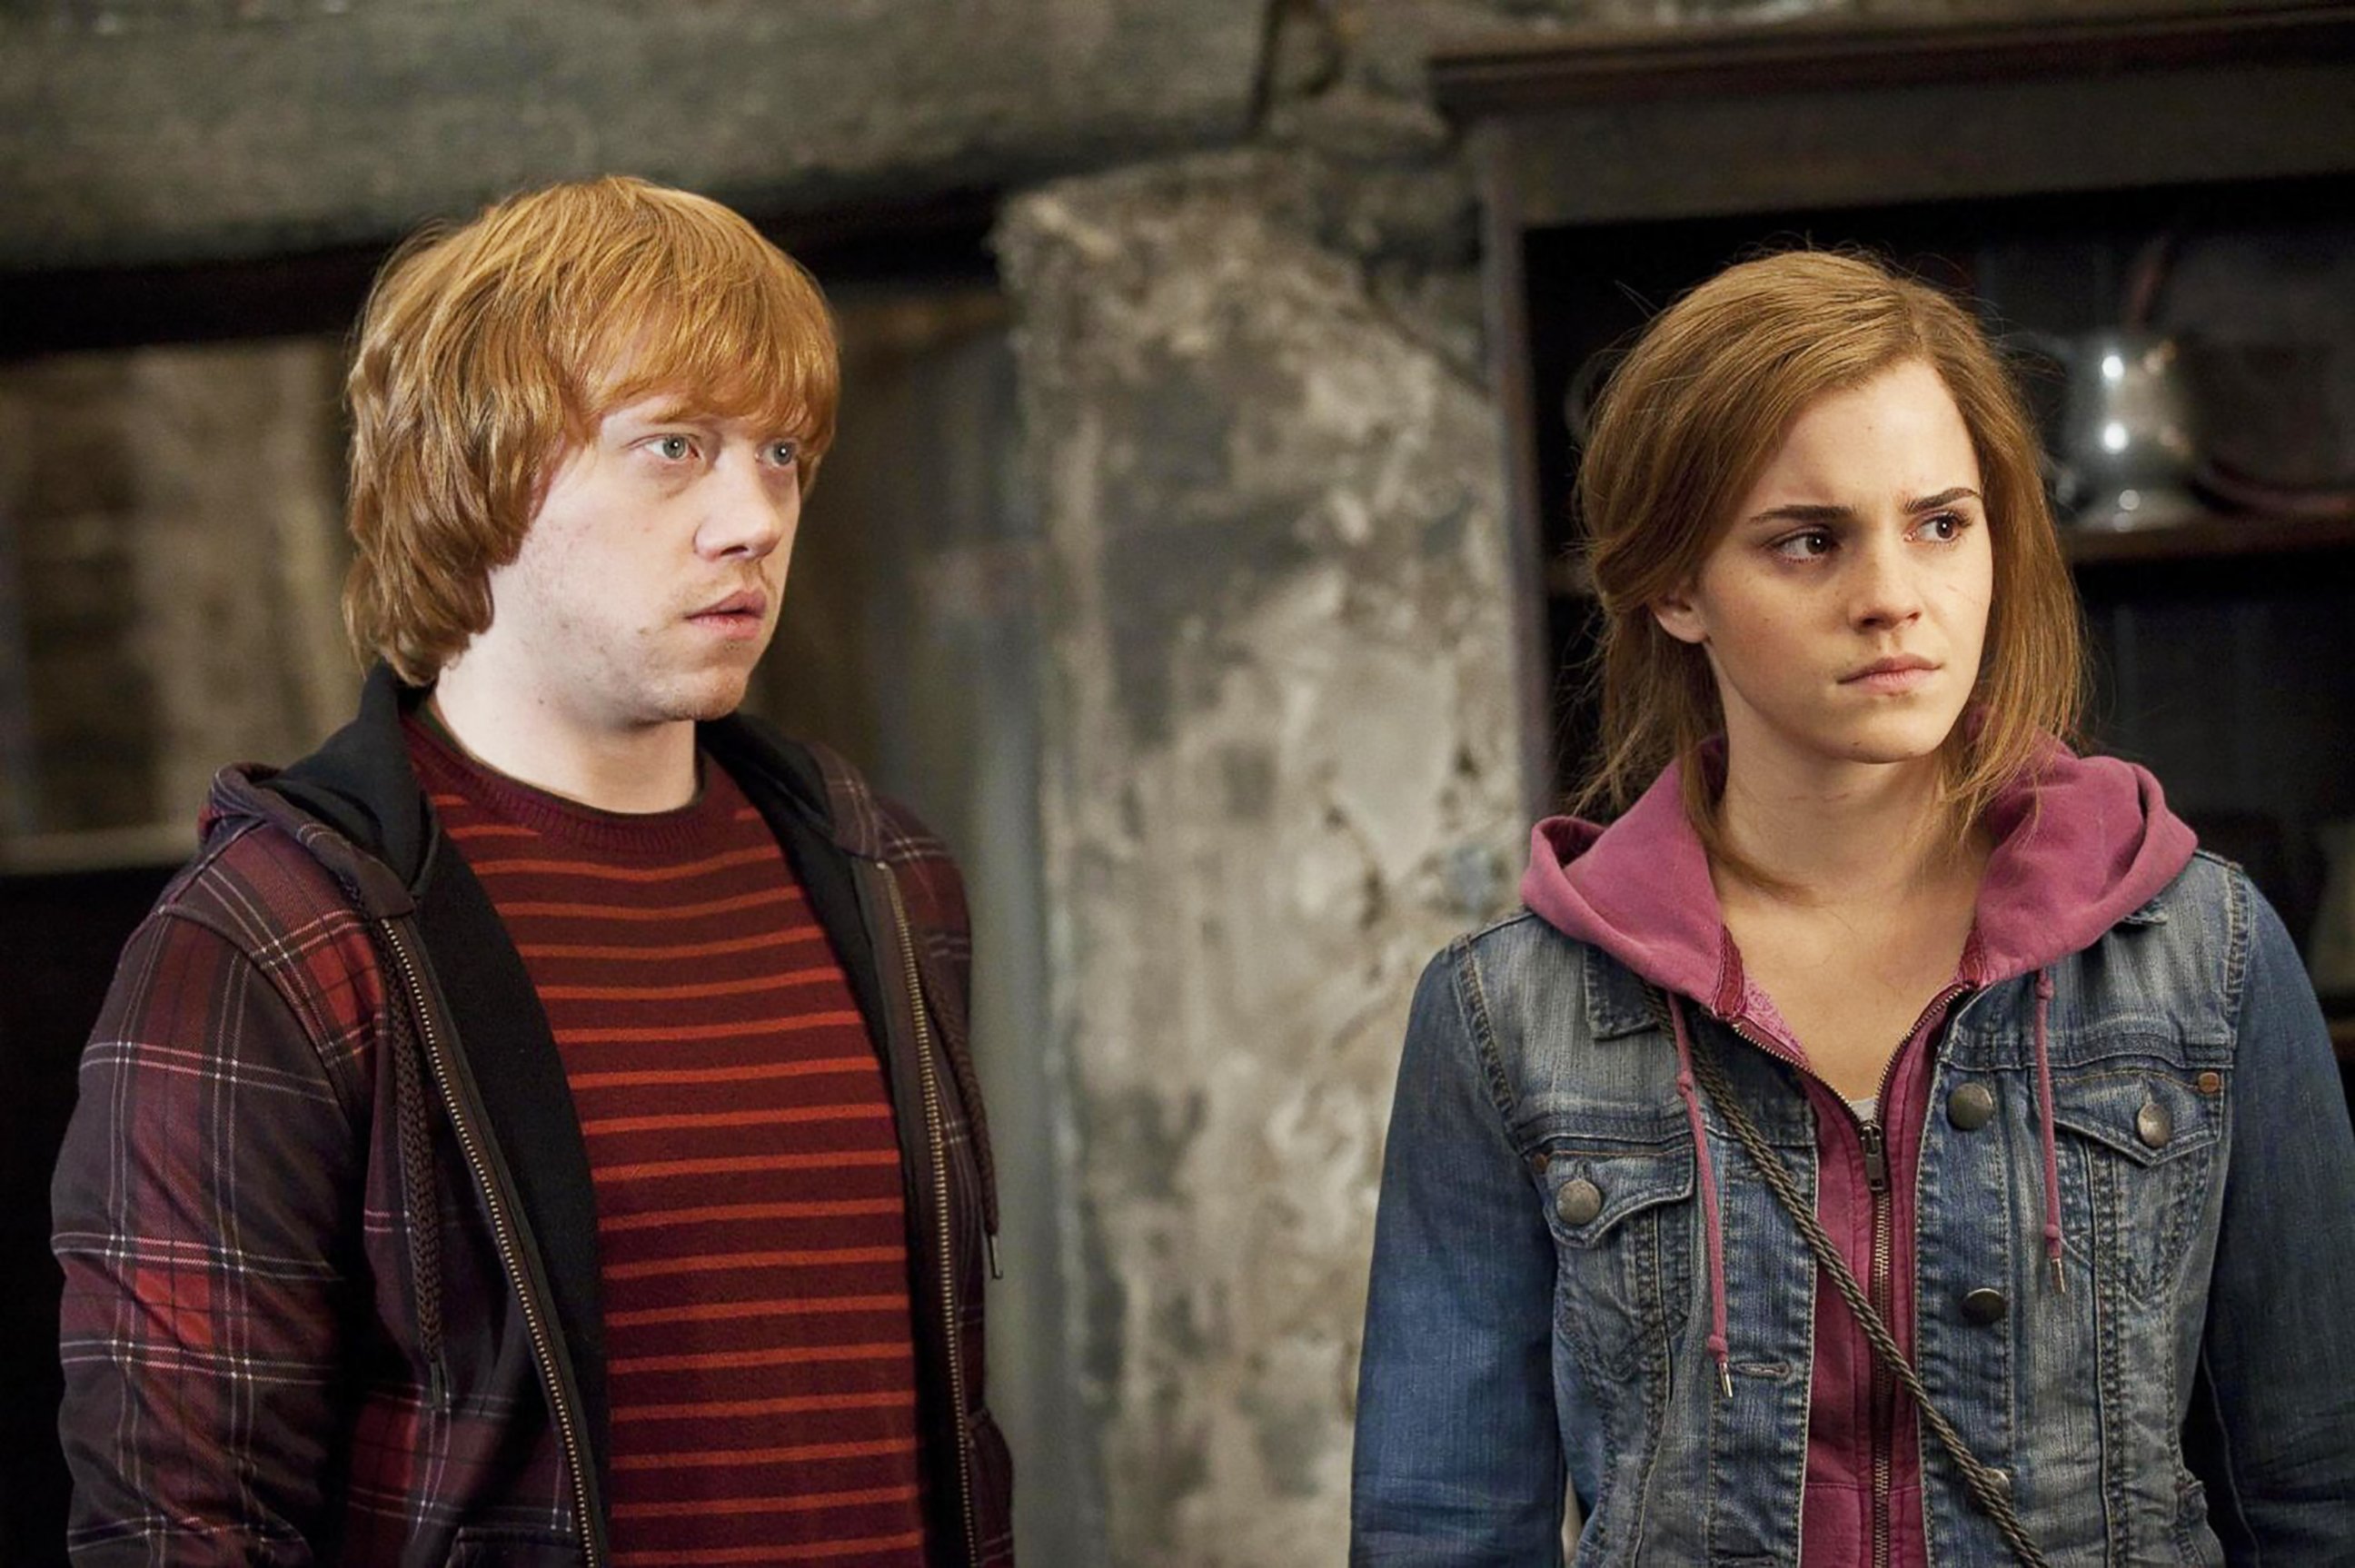 PHOTO: Rupert Grint and Emma Watson in "Harry Potter and the Deathly Hallows: Part 2."